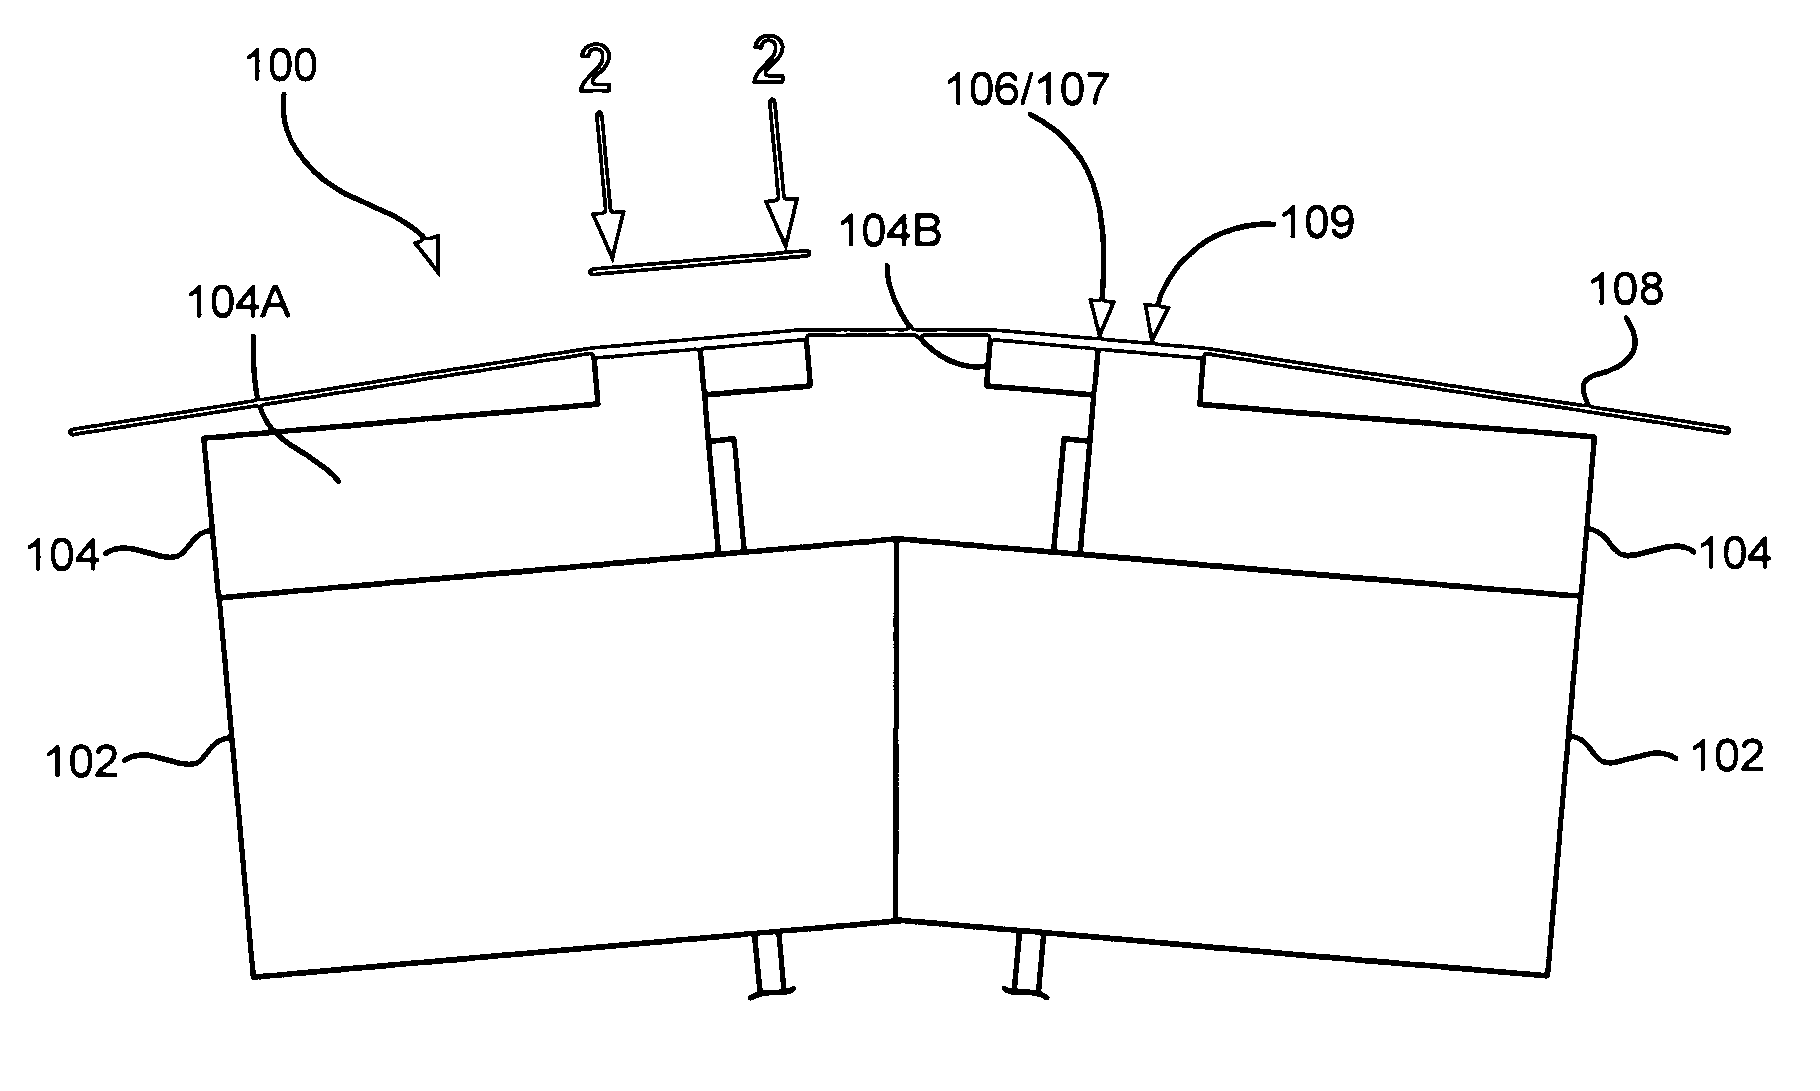 Magnetic head having selectively defined reader gap thicknesses